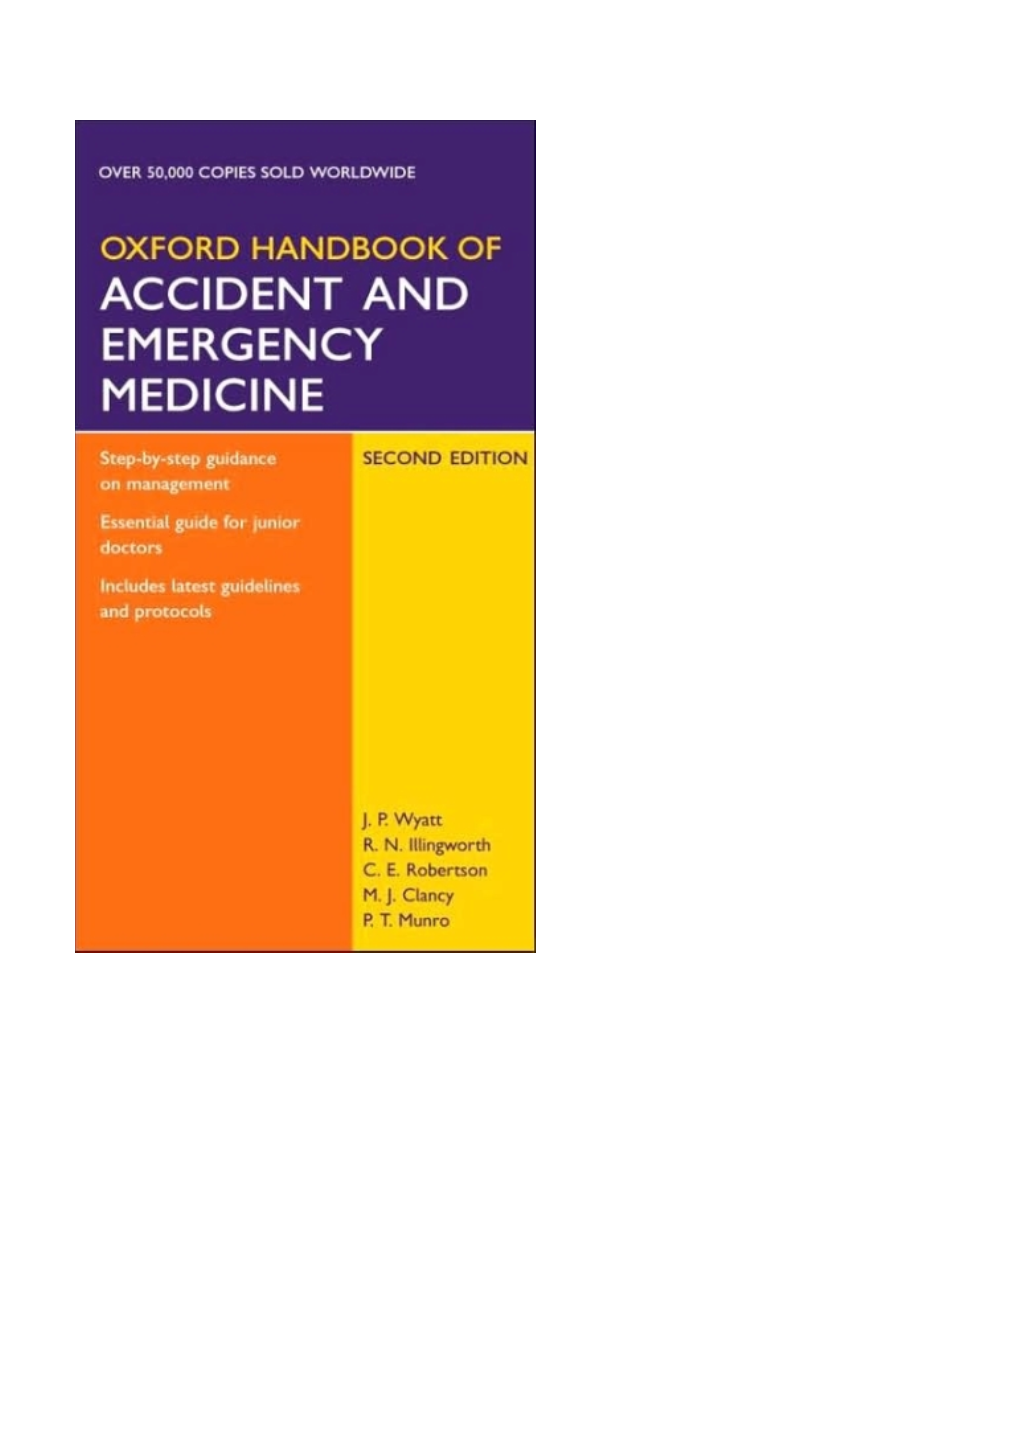 Oxford Handbook of Accident and Emergency Medicine.Pdf